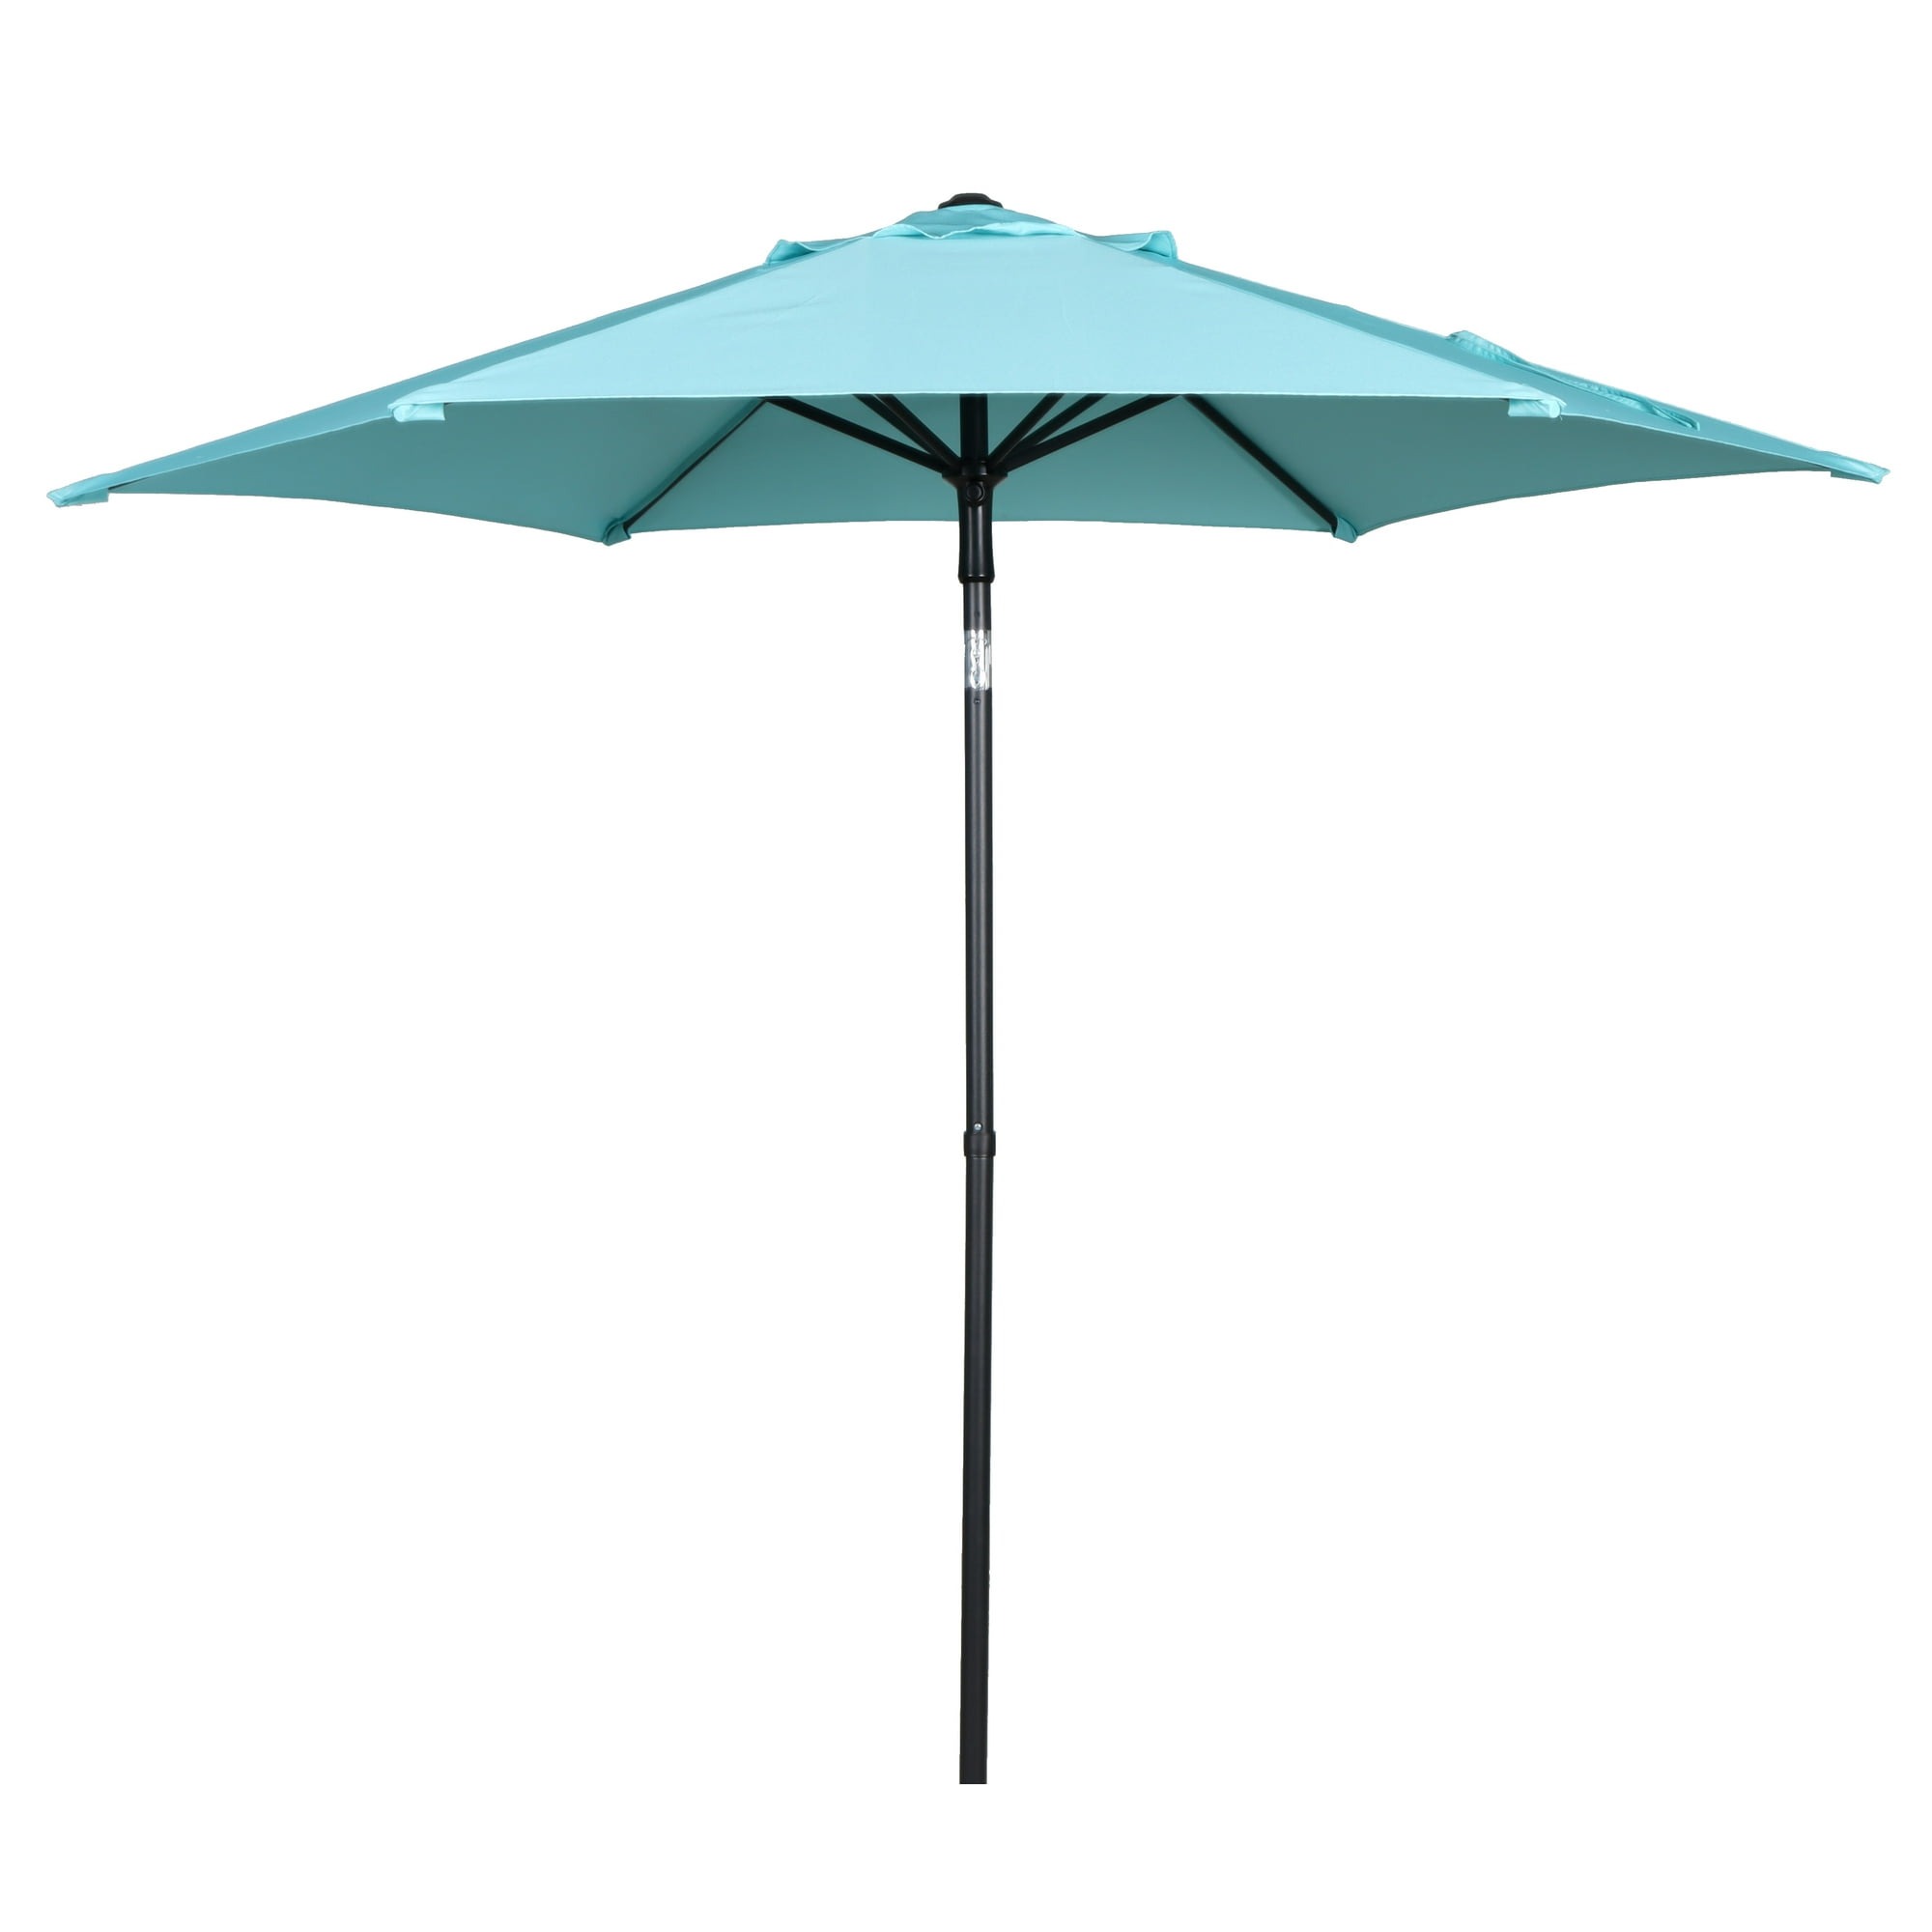 Mainstays 7.5 Foot Push-Up Round Market Umbrella, multiple colors available, $29.97, Walmart is $29.97